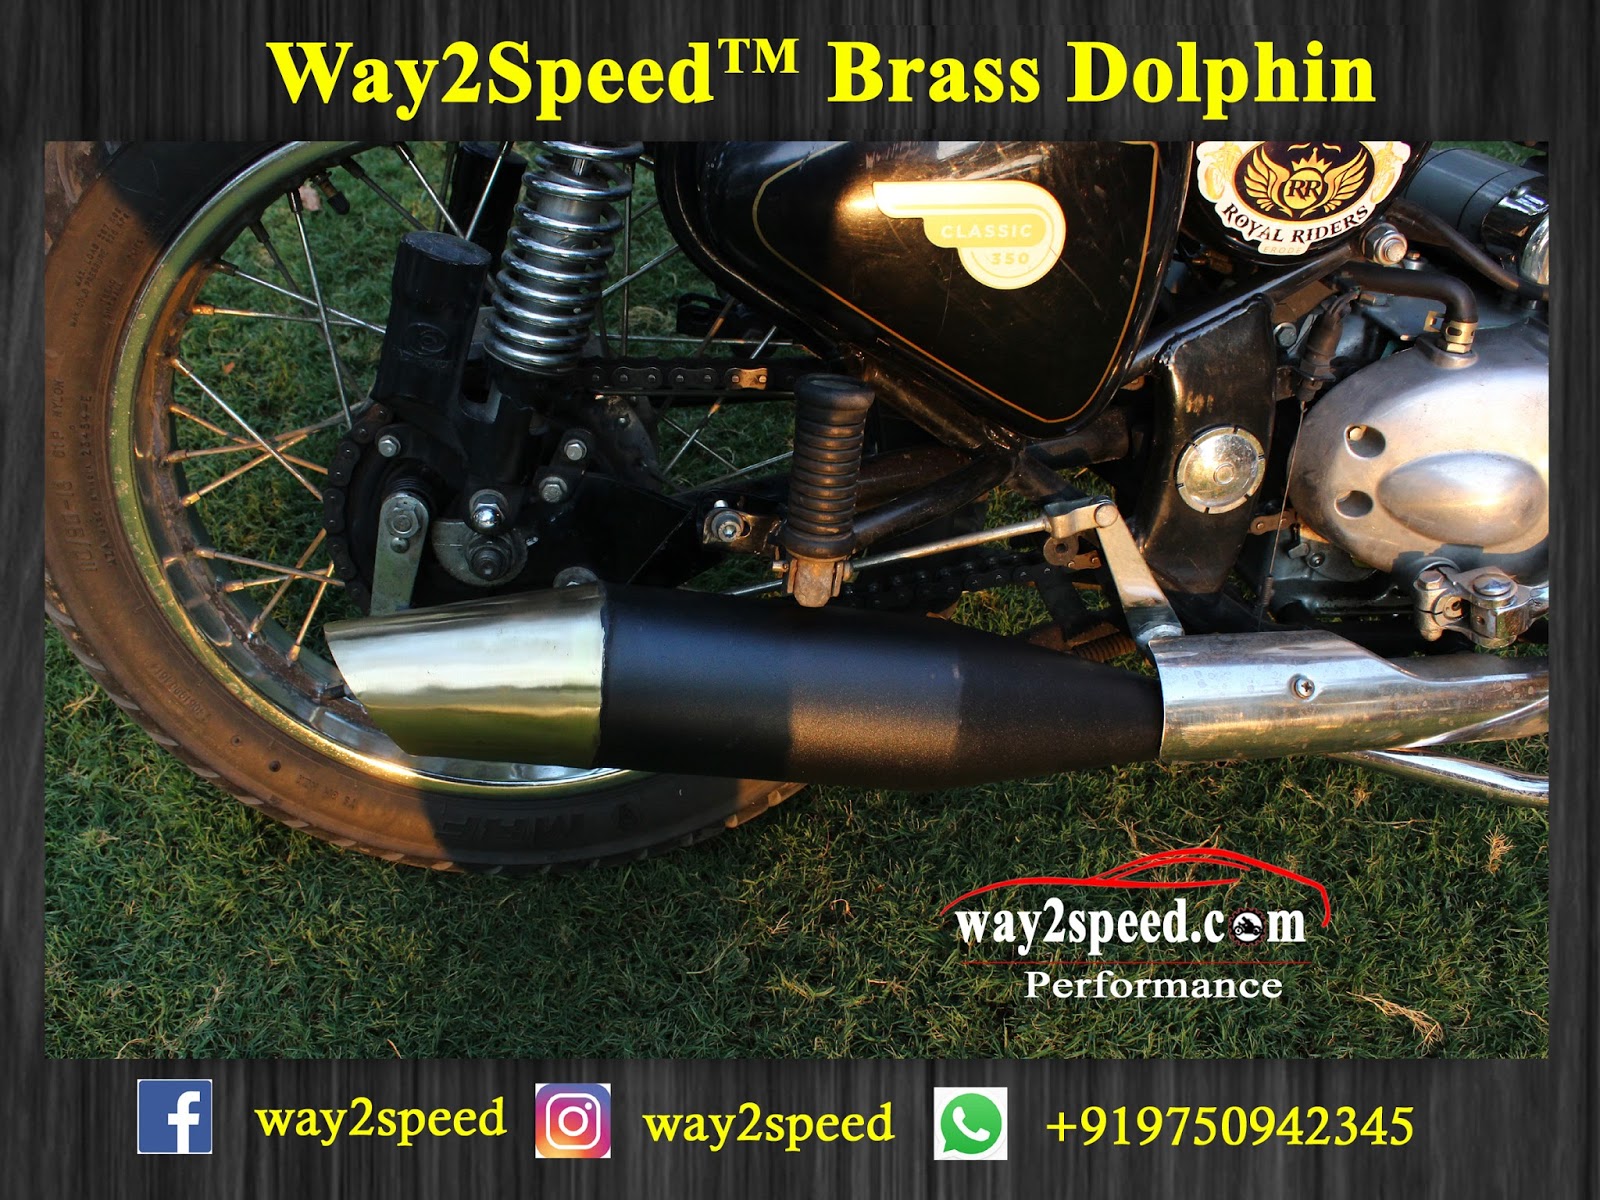 Royal Enfield Dolphin Silencer (brass) | way2speed Performance | royal enfield Silencer | royal enfield Exhaust | royal enfield classic 350 silencer sound | royal enfield glass wool silencer | Silencer for classic 350 | Best silencer for royal enfield | Bullet silencer sound increase  Royal Enfield Dolphin Silencer (brass) is a direct fit for Royal Enfield Bullet 350, Royal Enfield Classic 350, Royal Enfield Thunderbird 350, Royal Enfield Bullet 500, Royal Enfield Classic 500, Royal Enfield Thunderbird 500, Royal Enfield Continental GT